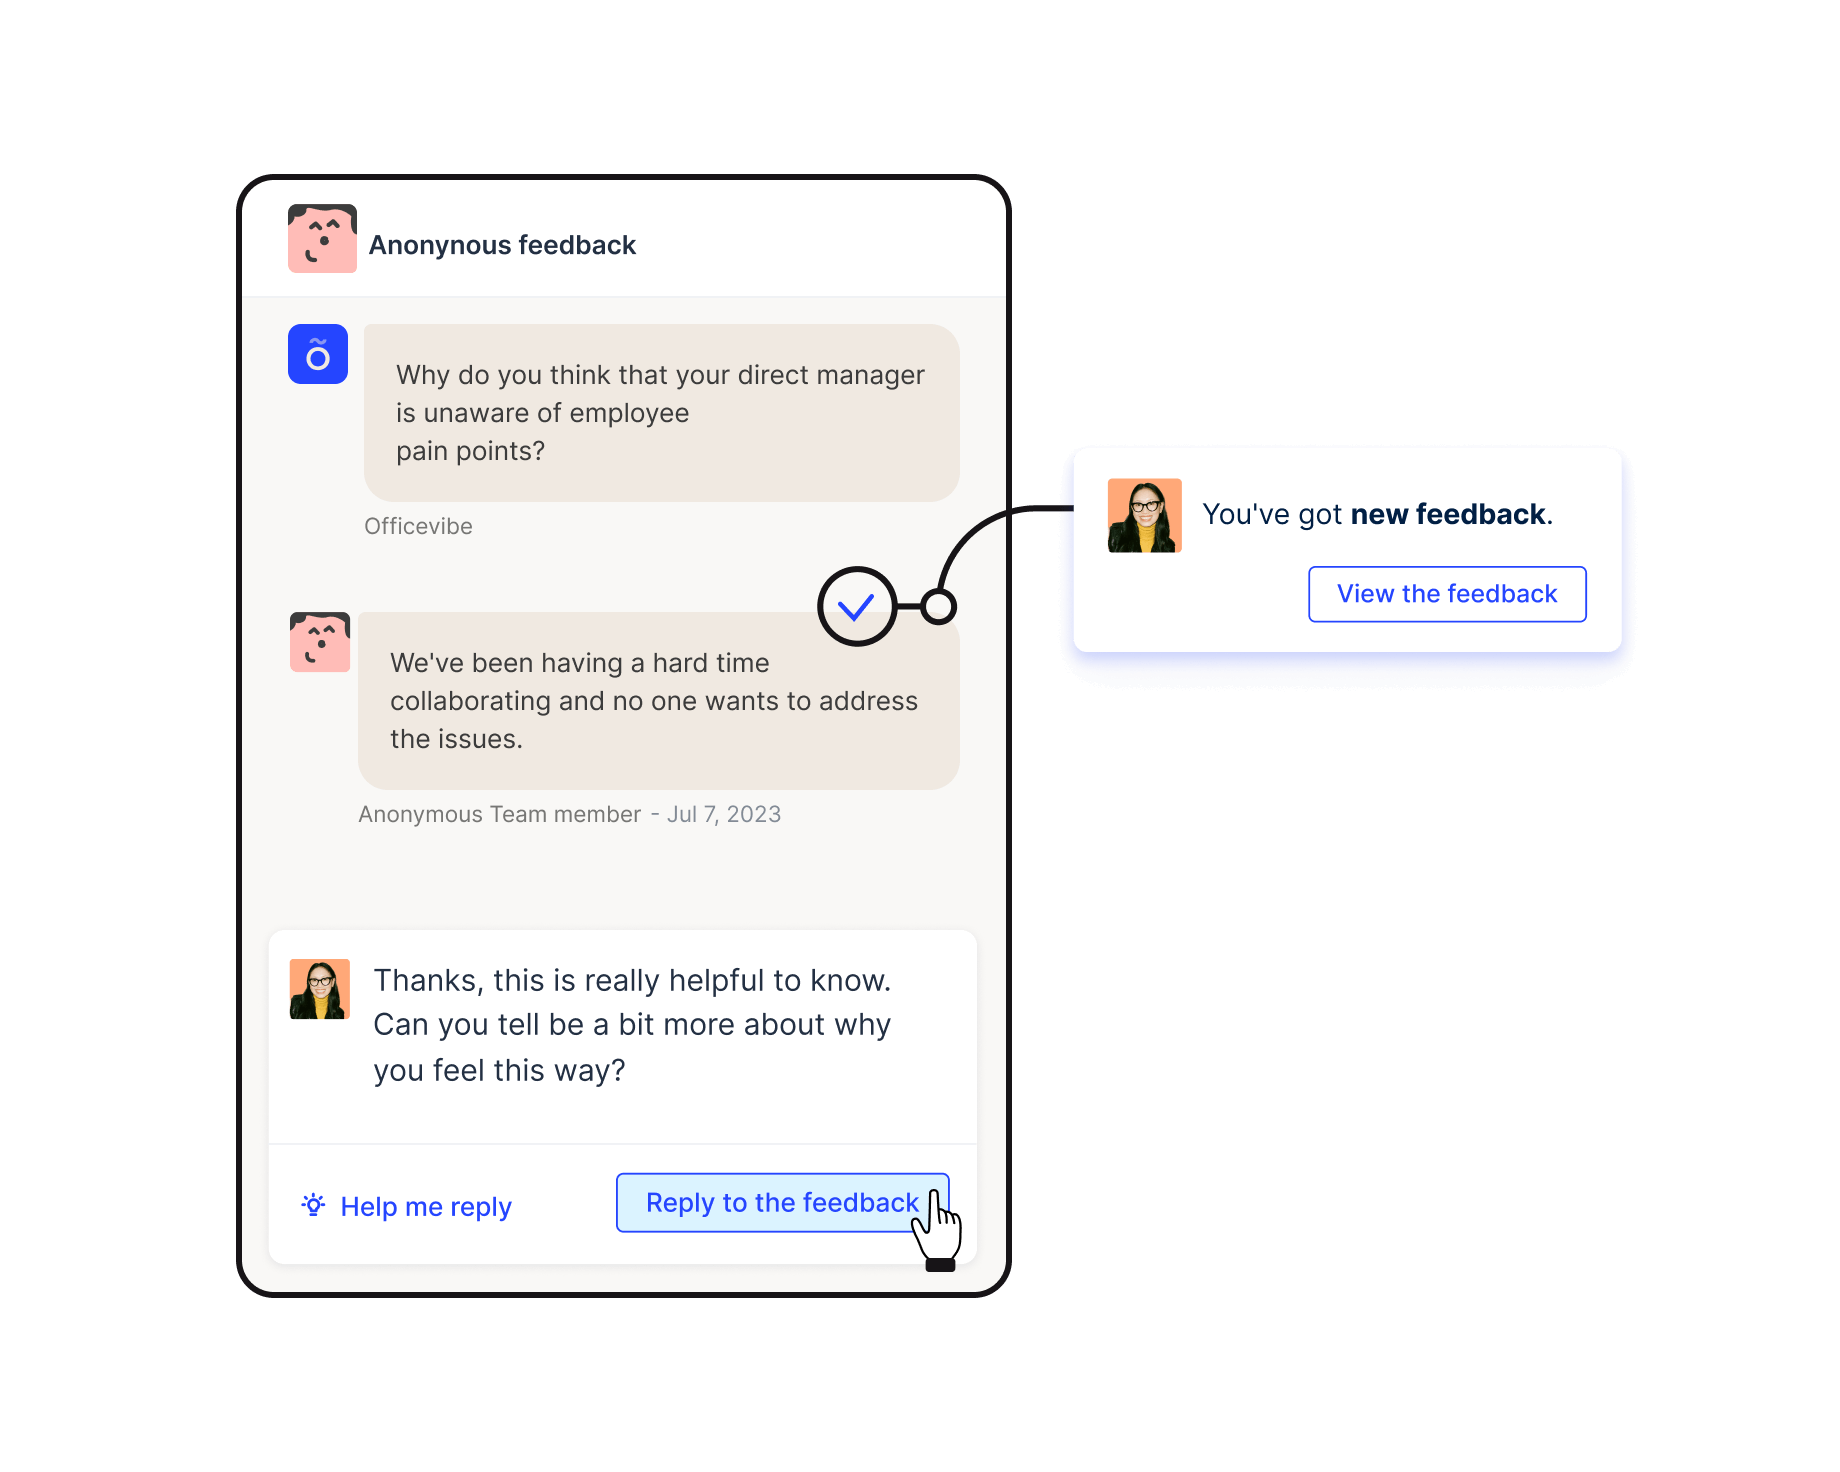 Officevibe messaging tool to get notified when you receive new feedback and reply to the anonymous employee who sent it.